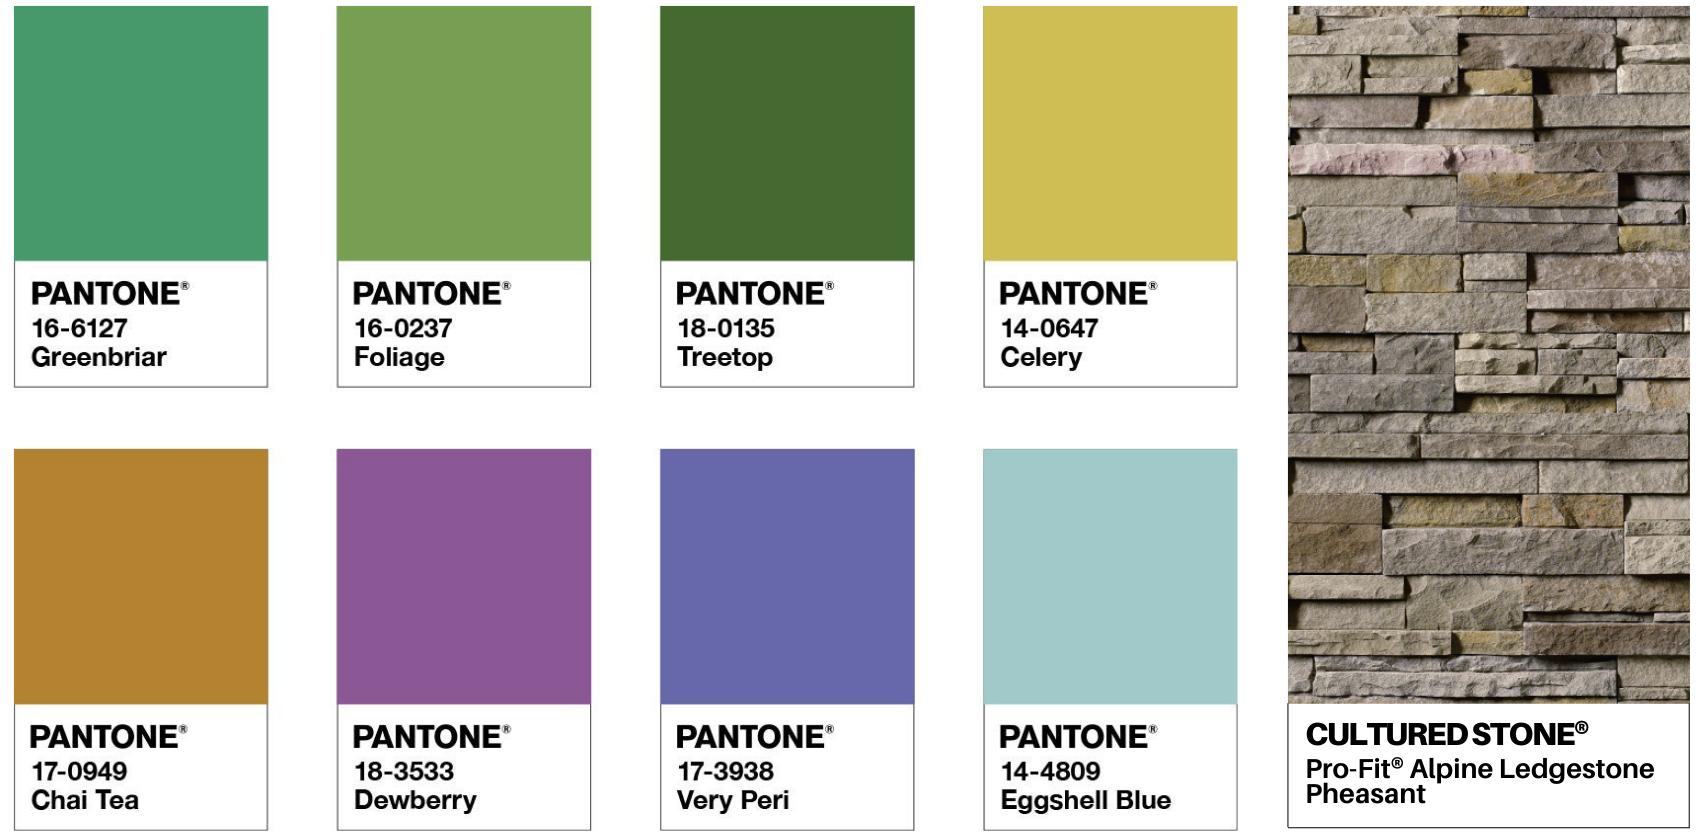 Pantone Color of the Year 2022